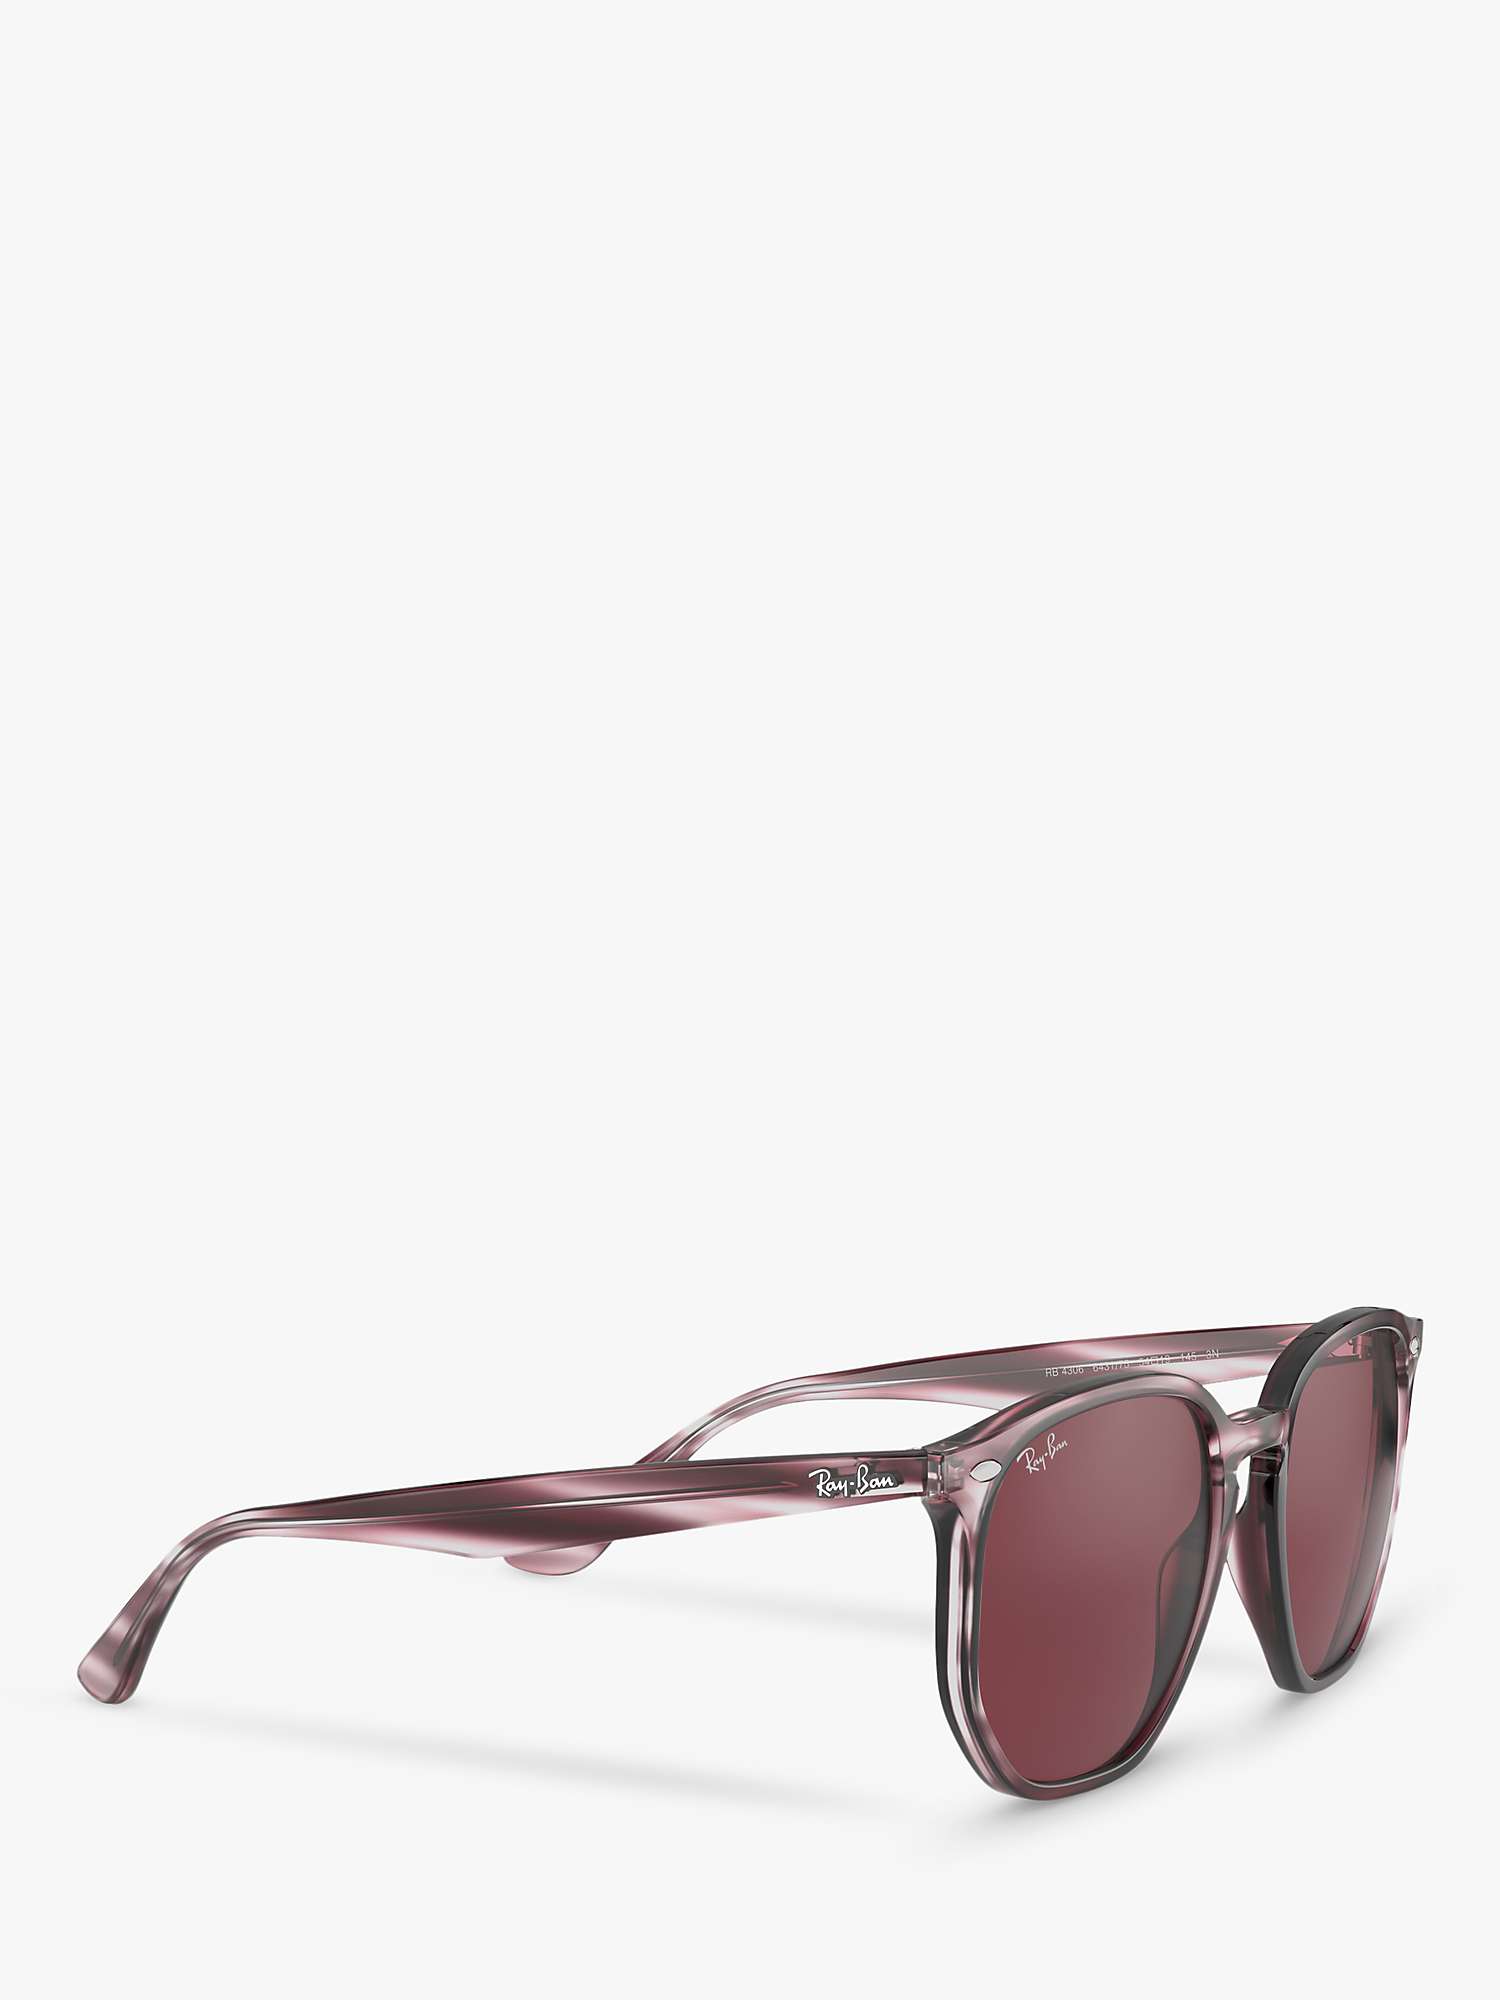 Buy Ray-Ban RB4306 Unisex Oval Sunglasses Online at johnlewis.com